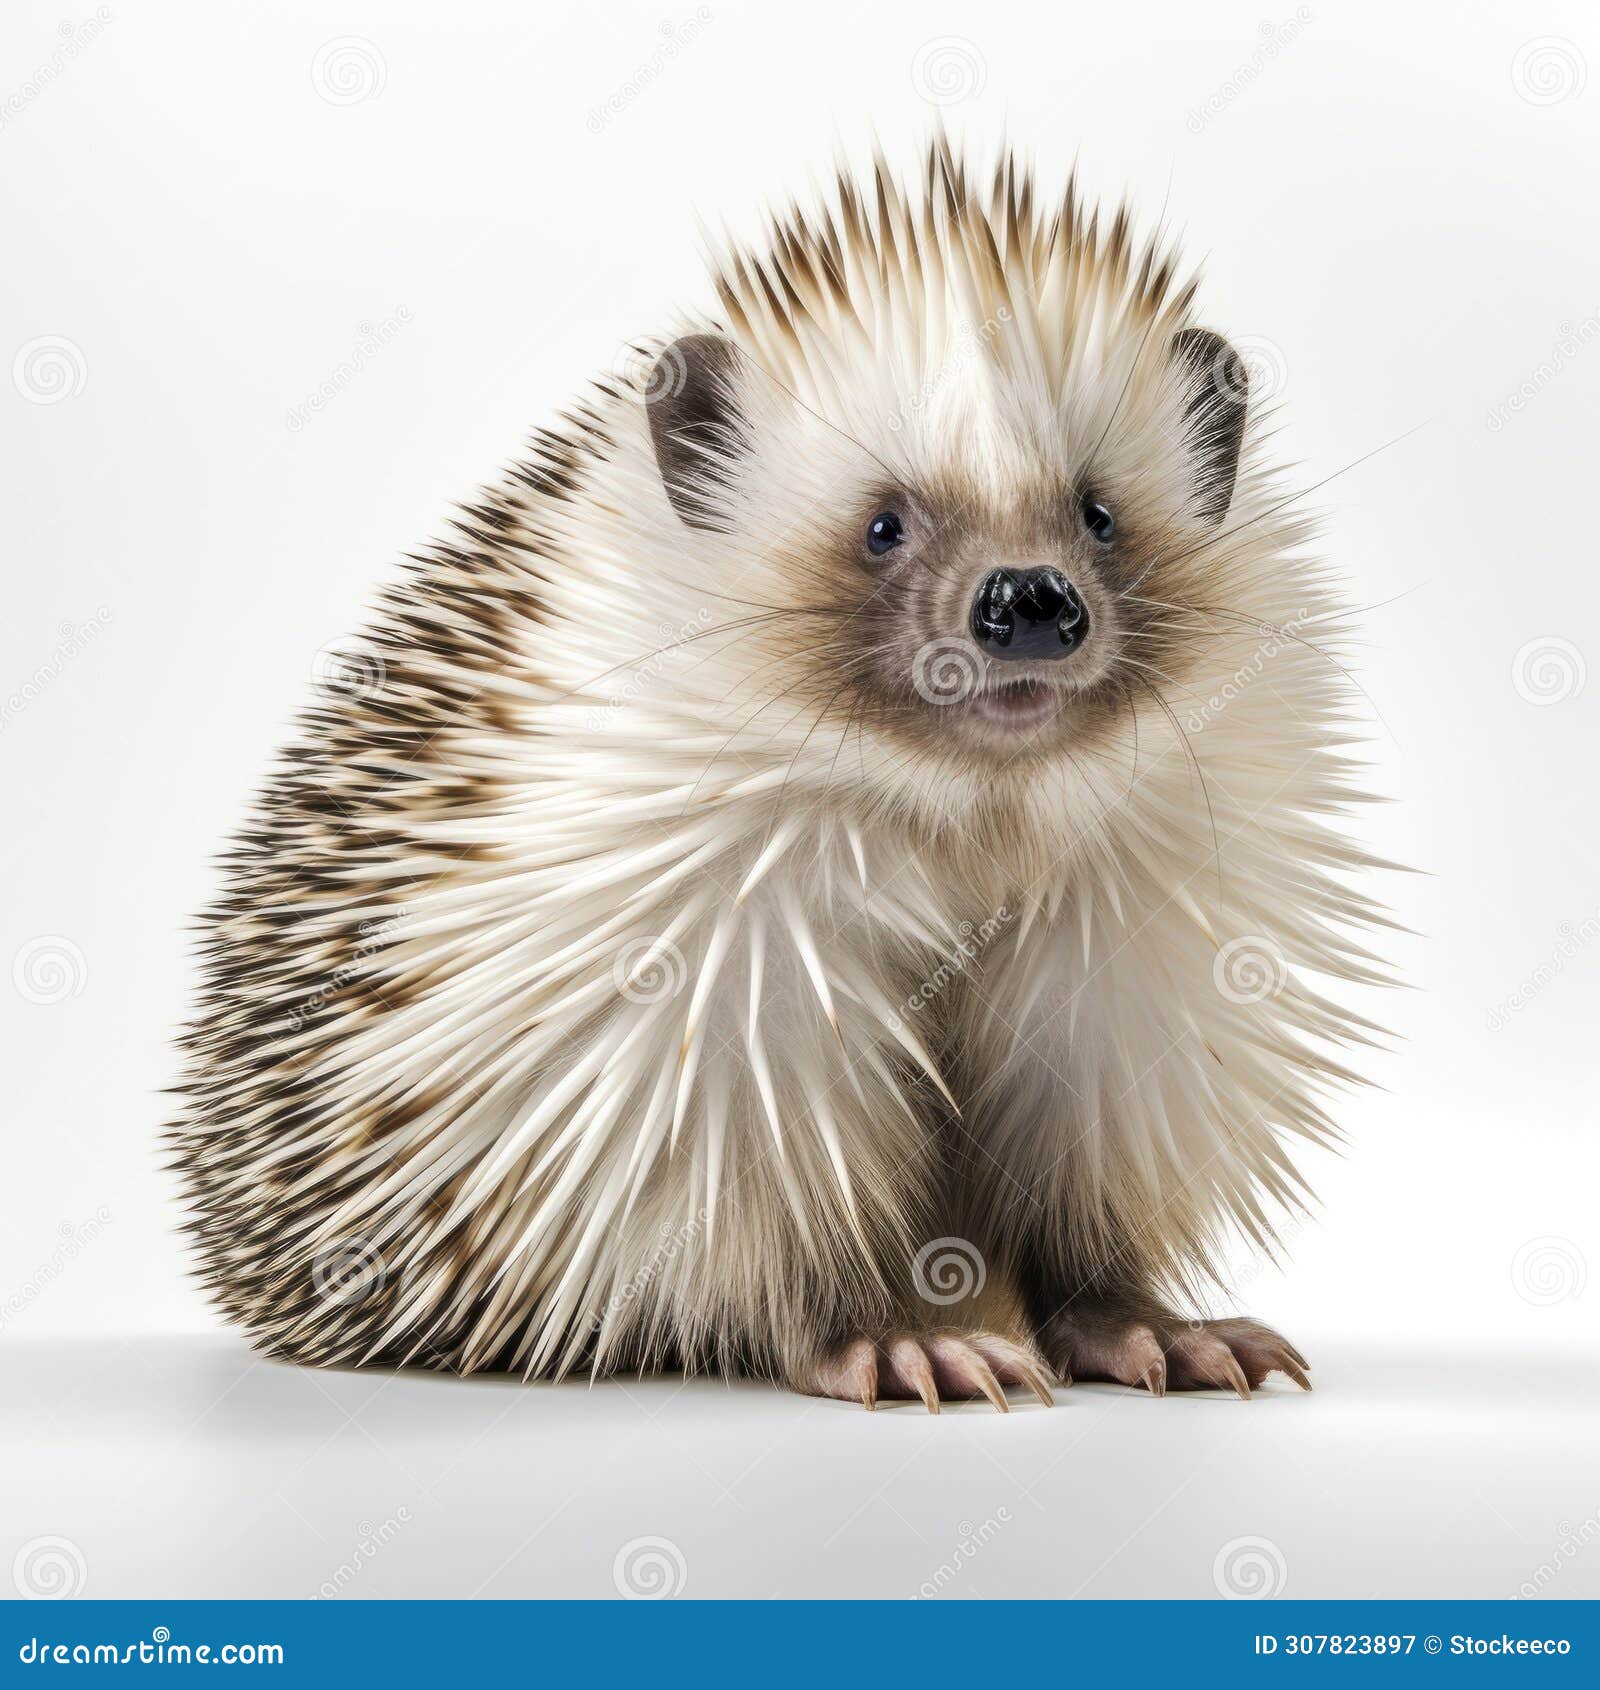 stunning national geographic-style photo of a spiky porcupine